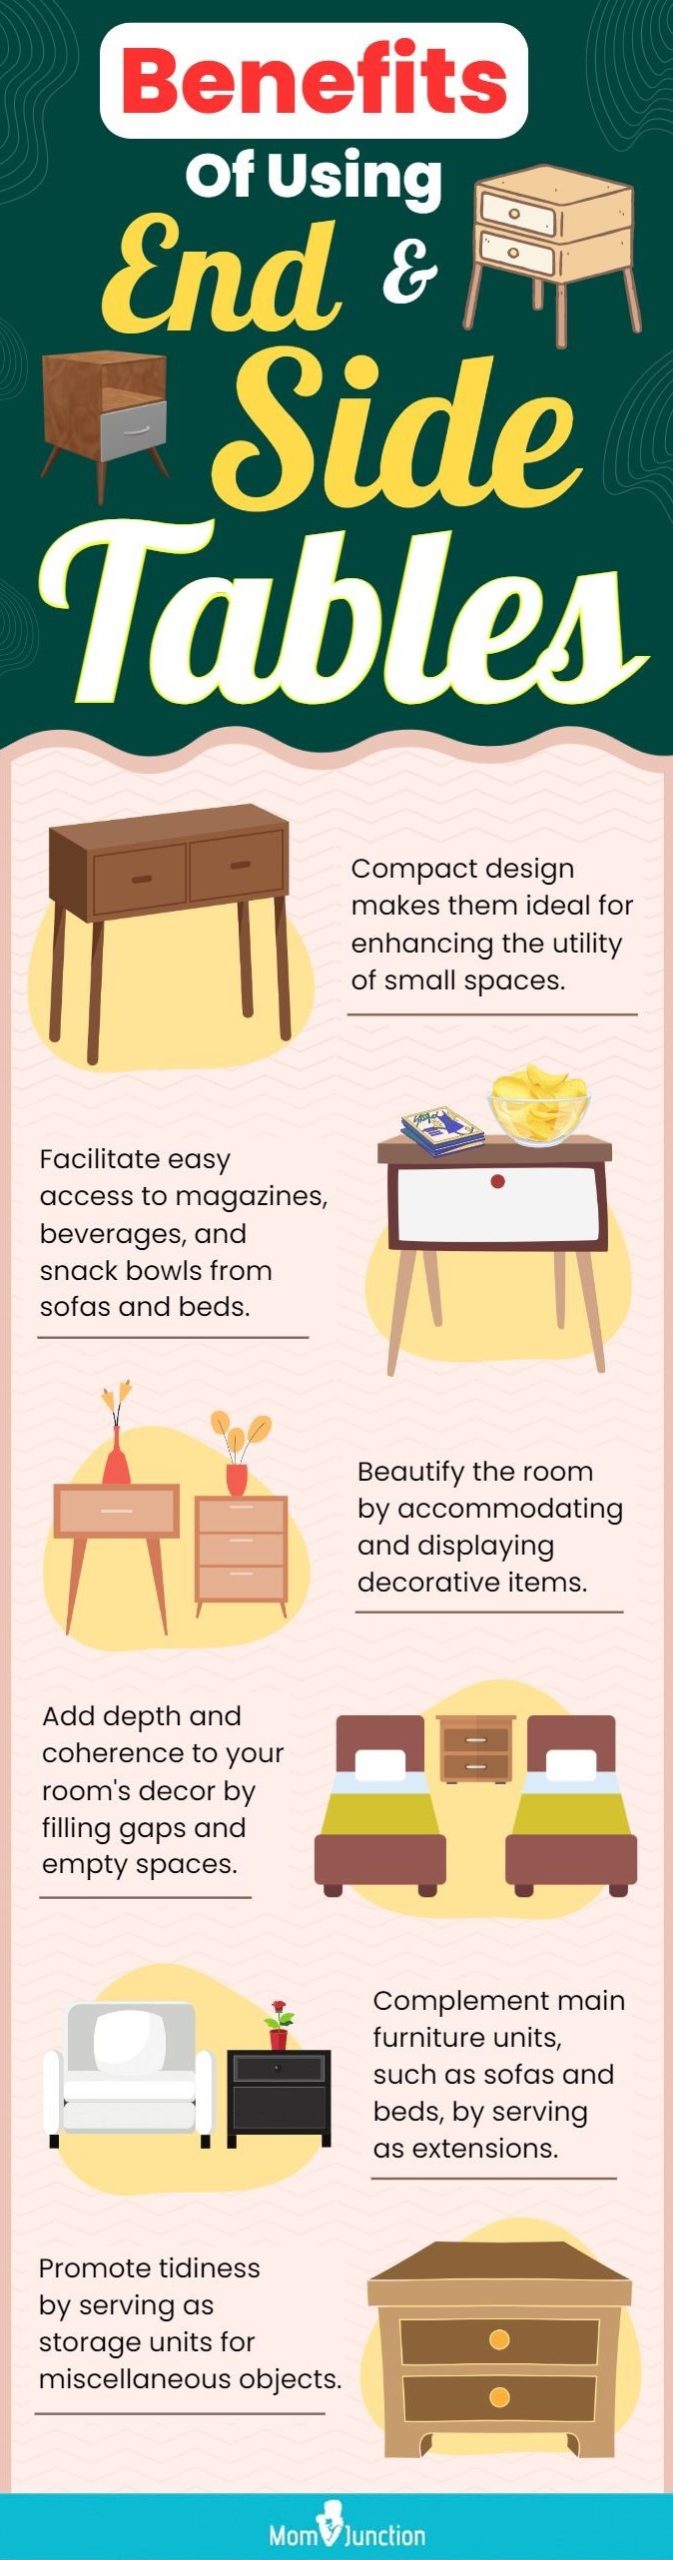 Benefits Of Using End And Side Tables (infographic)